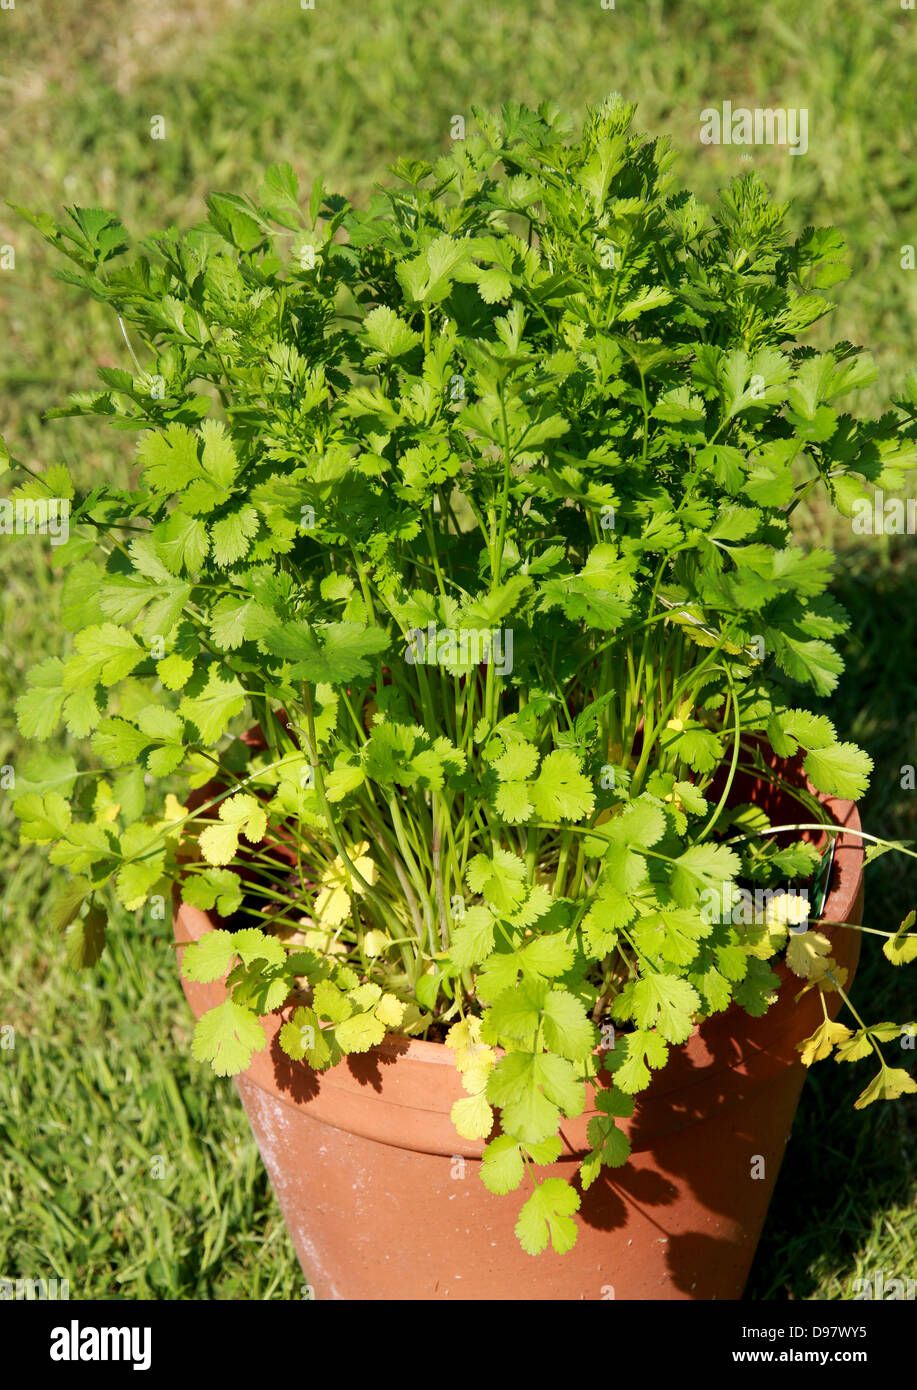 Coriander, Coriandrum sativum, Apiaceae. Also known as cilantro, Chinese parsley or dhania, is a herb in the family Apiaceae. Stock Photo